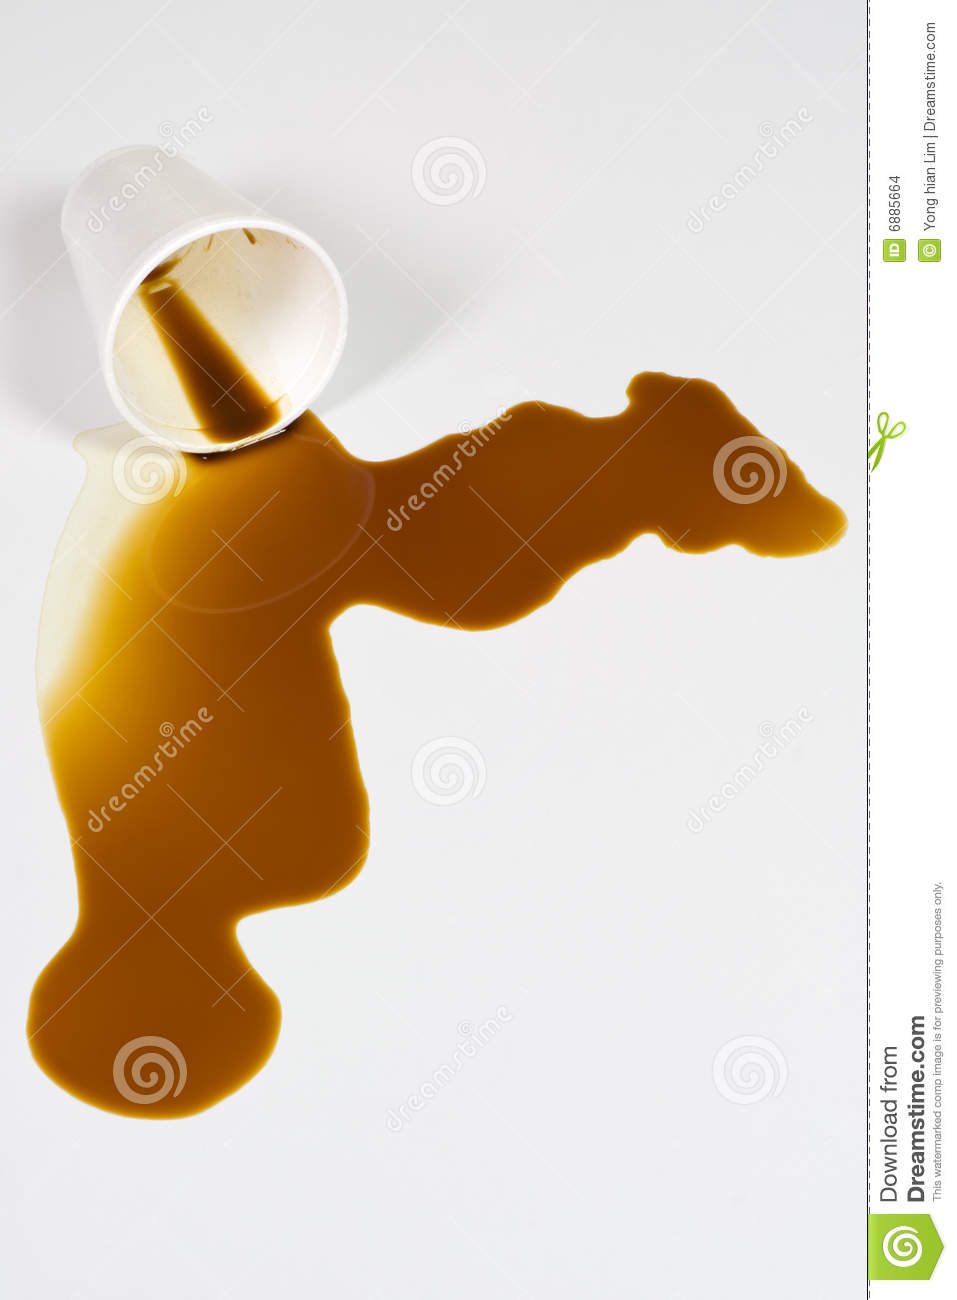 Spilled Coffee Stock Images   Image  6885664